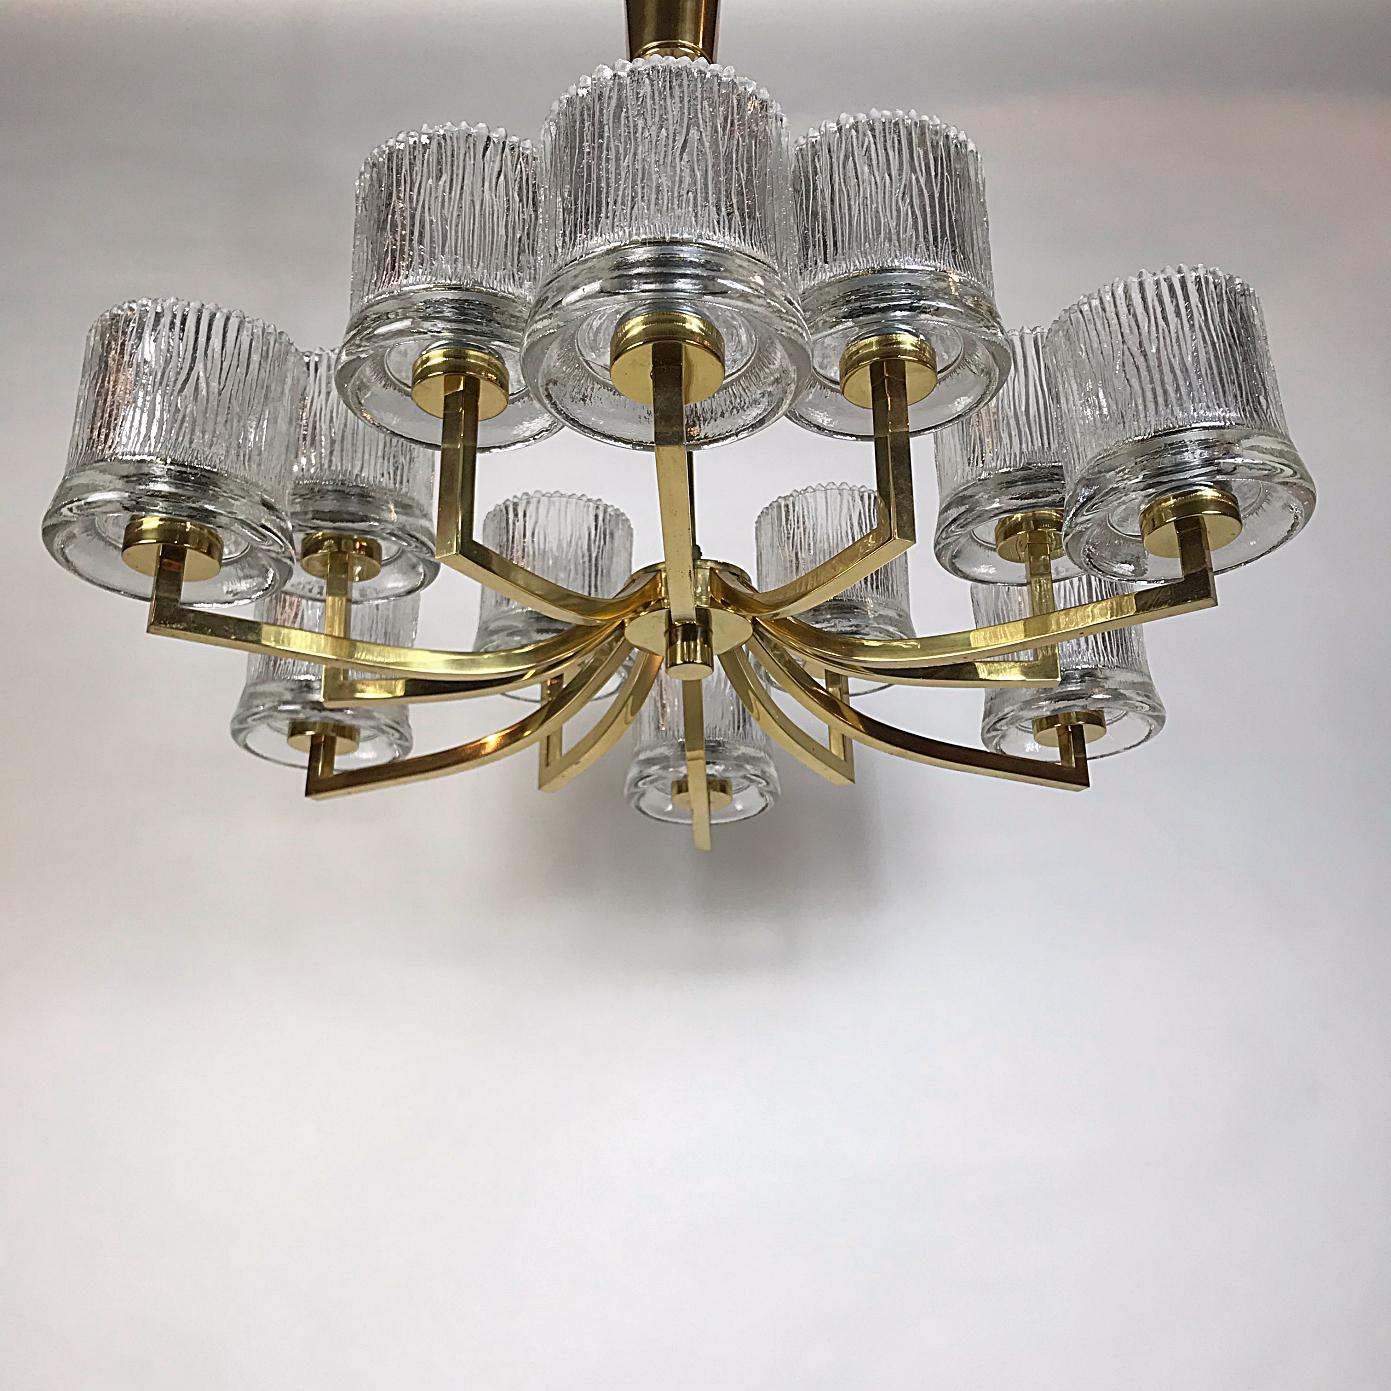 Huge beautiful Mid-Century Modern chandelier manufactured by Orrefors, with the characteristic blown ice glass cups and gold plated brass frame. This chandelier is a striking appearance in every room. Due to the sublime combination of glass and